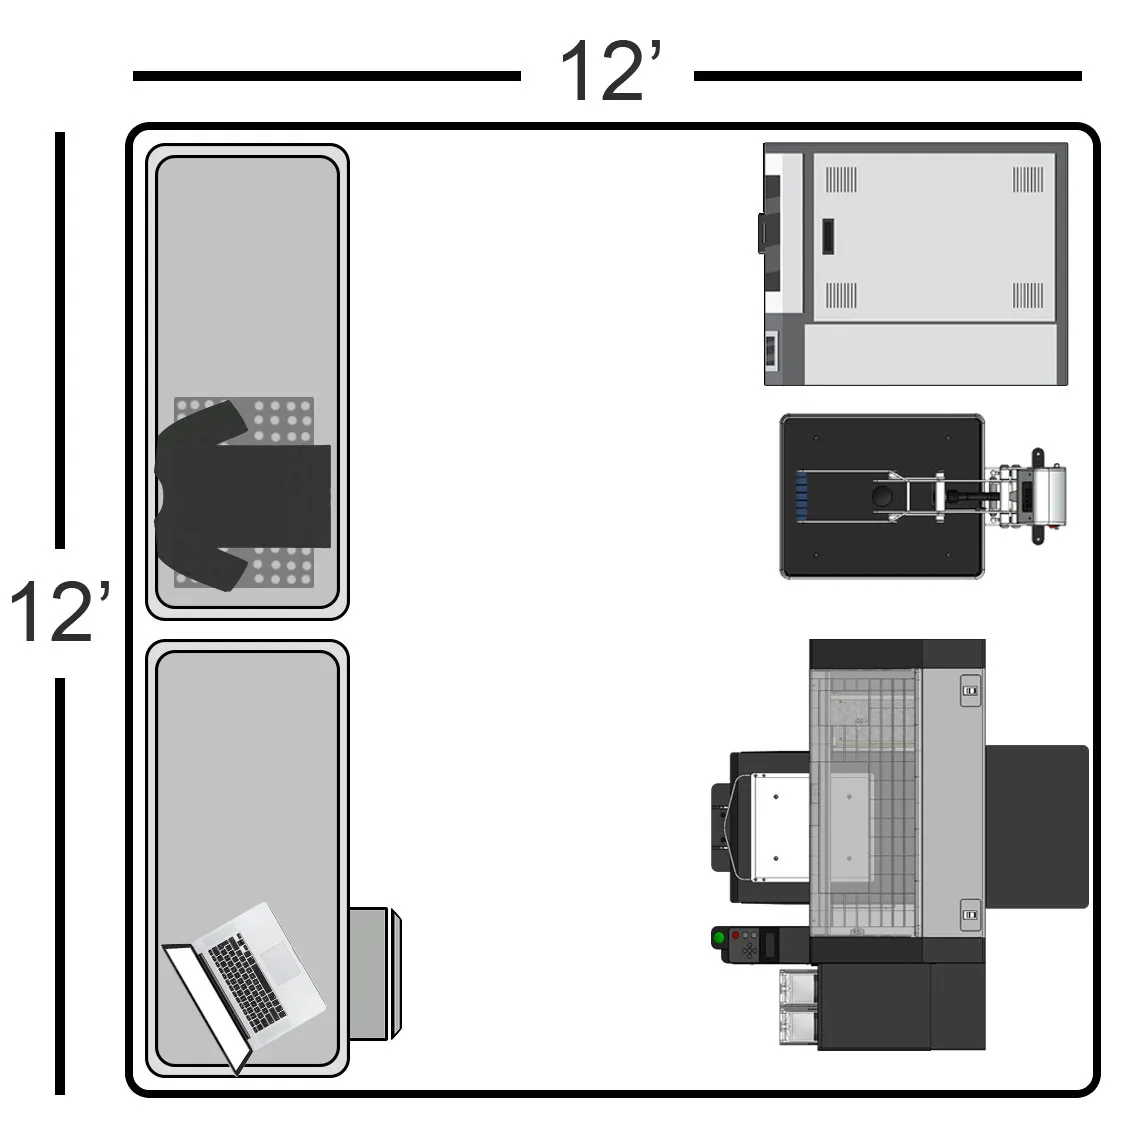 Floor plan graphic for a suggested room set up